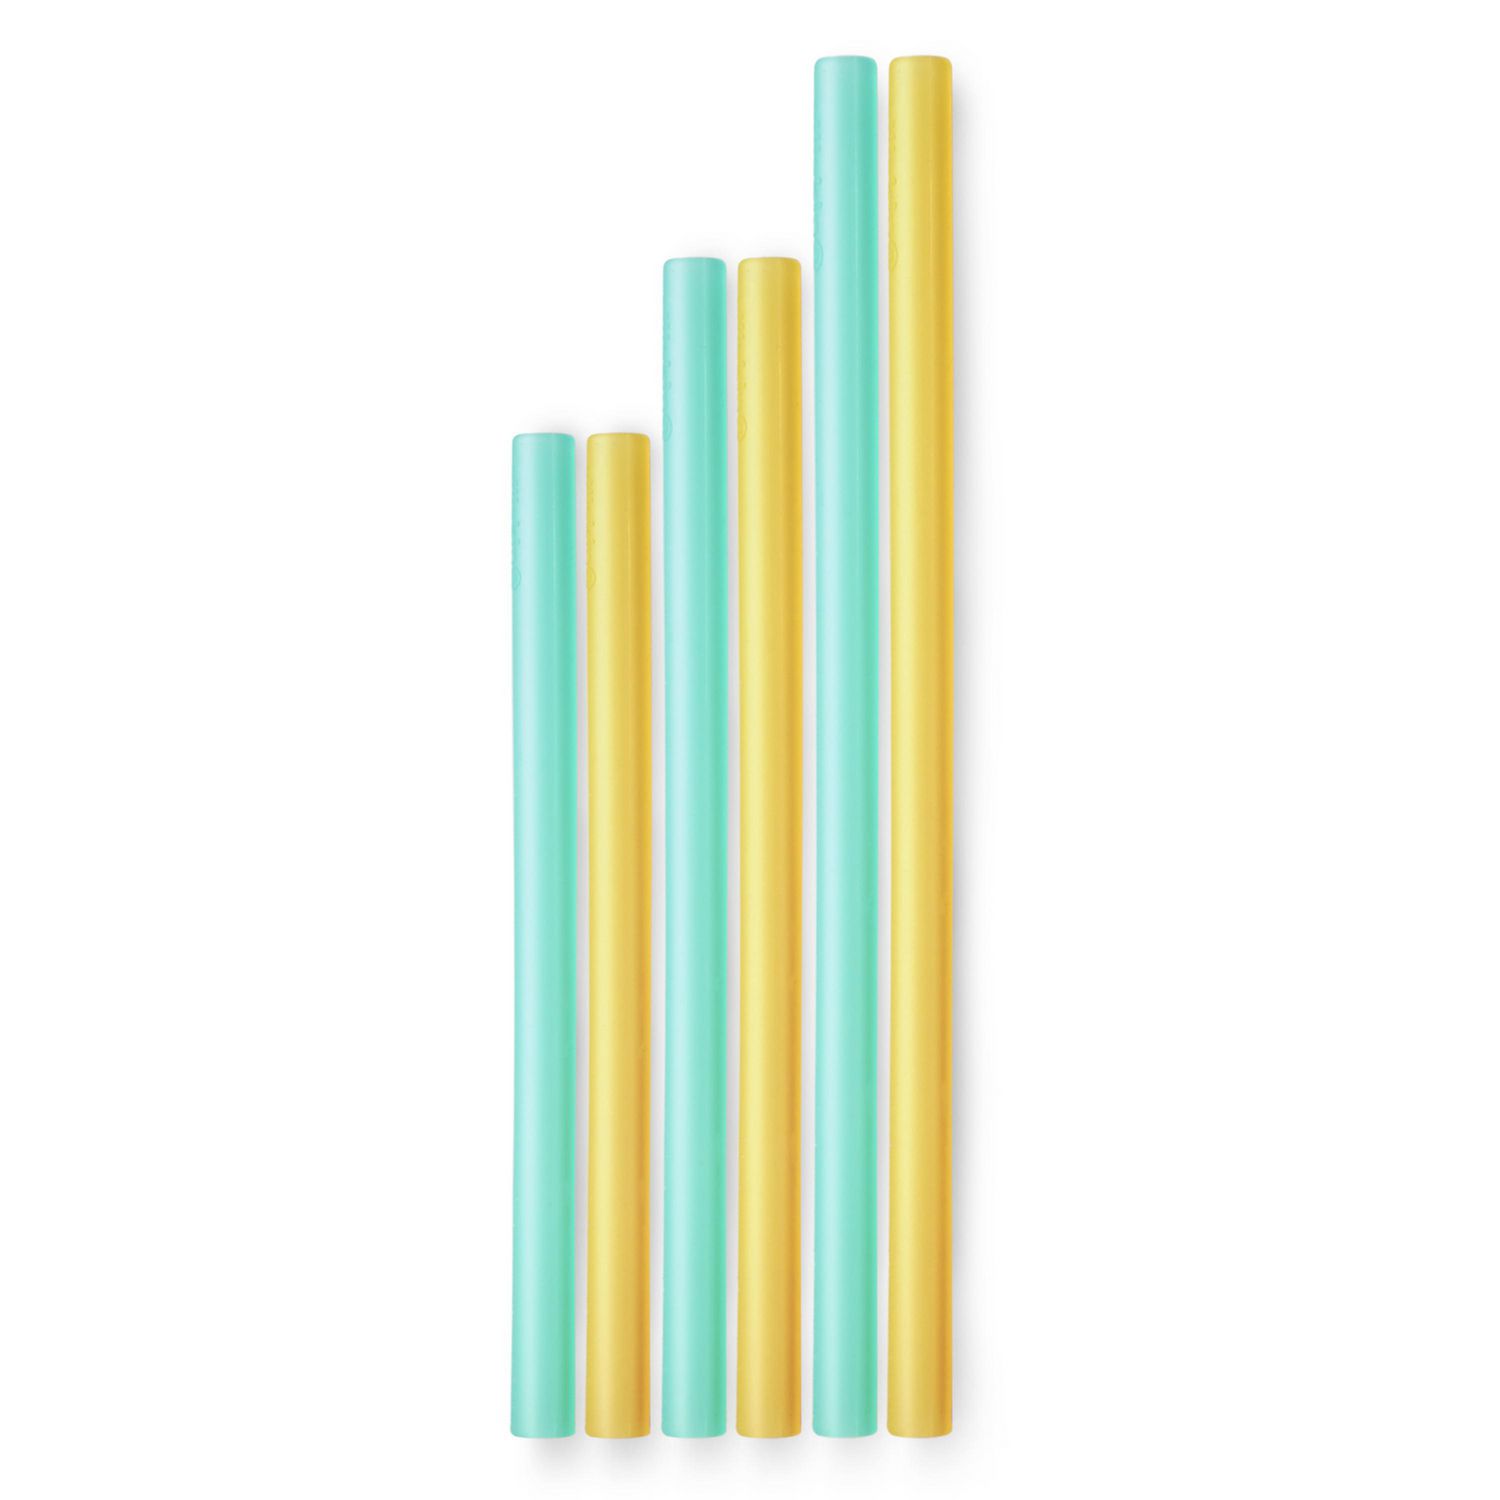 Silikids X-Wide Silicone Reusable Straws - Fog/Mint/Frost (3PK)